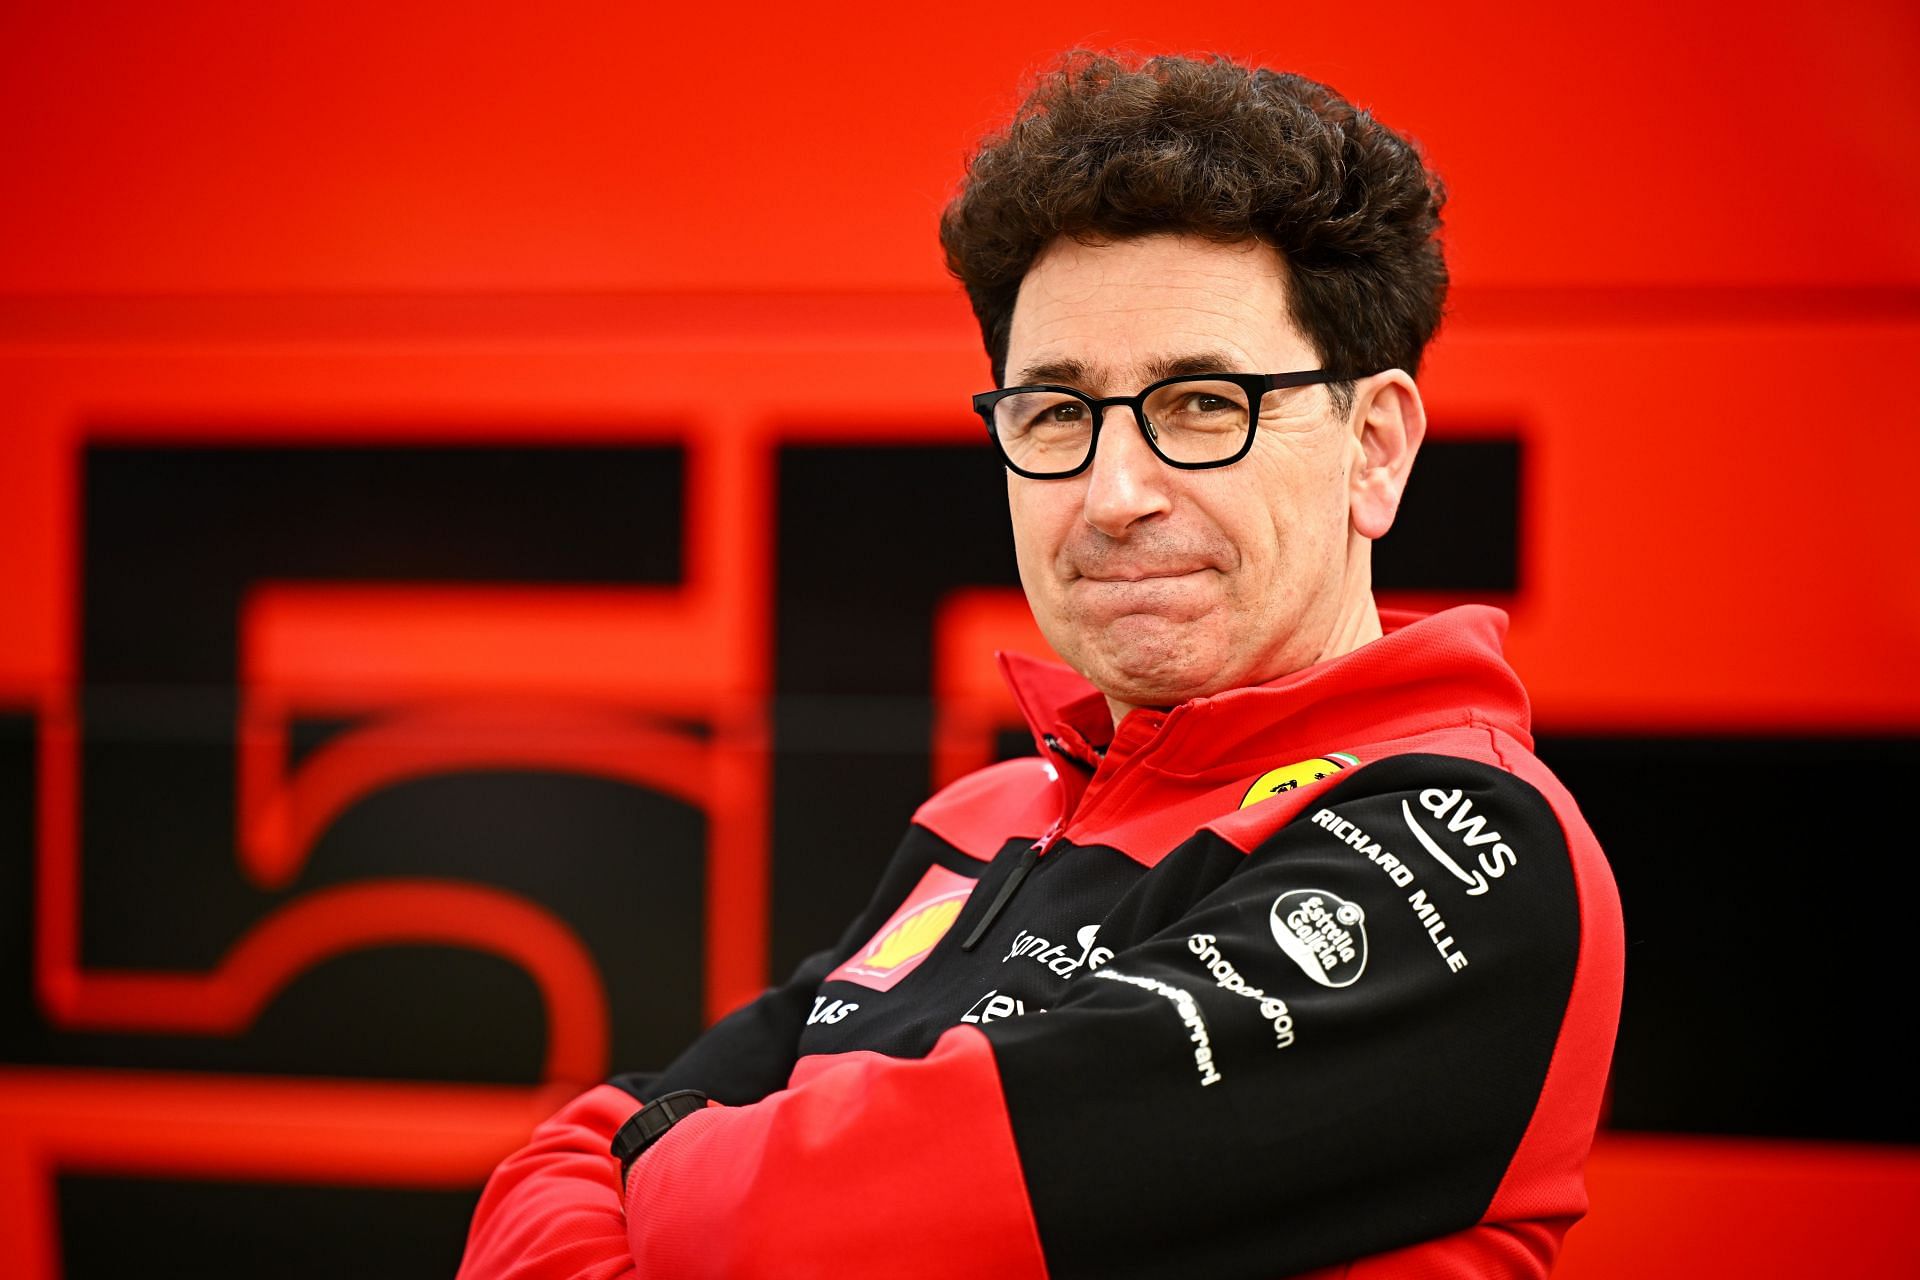 Mattia Binotto confirmed that Ferrari was not going to change its approach to the races because of its early lead in the championship